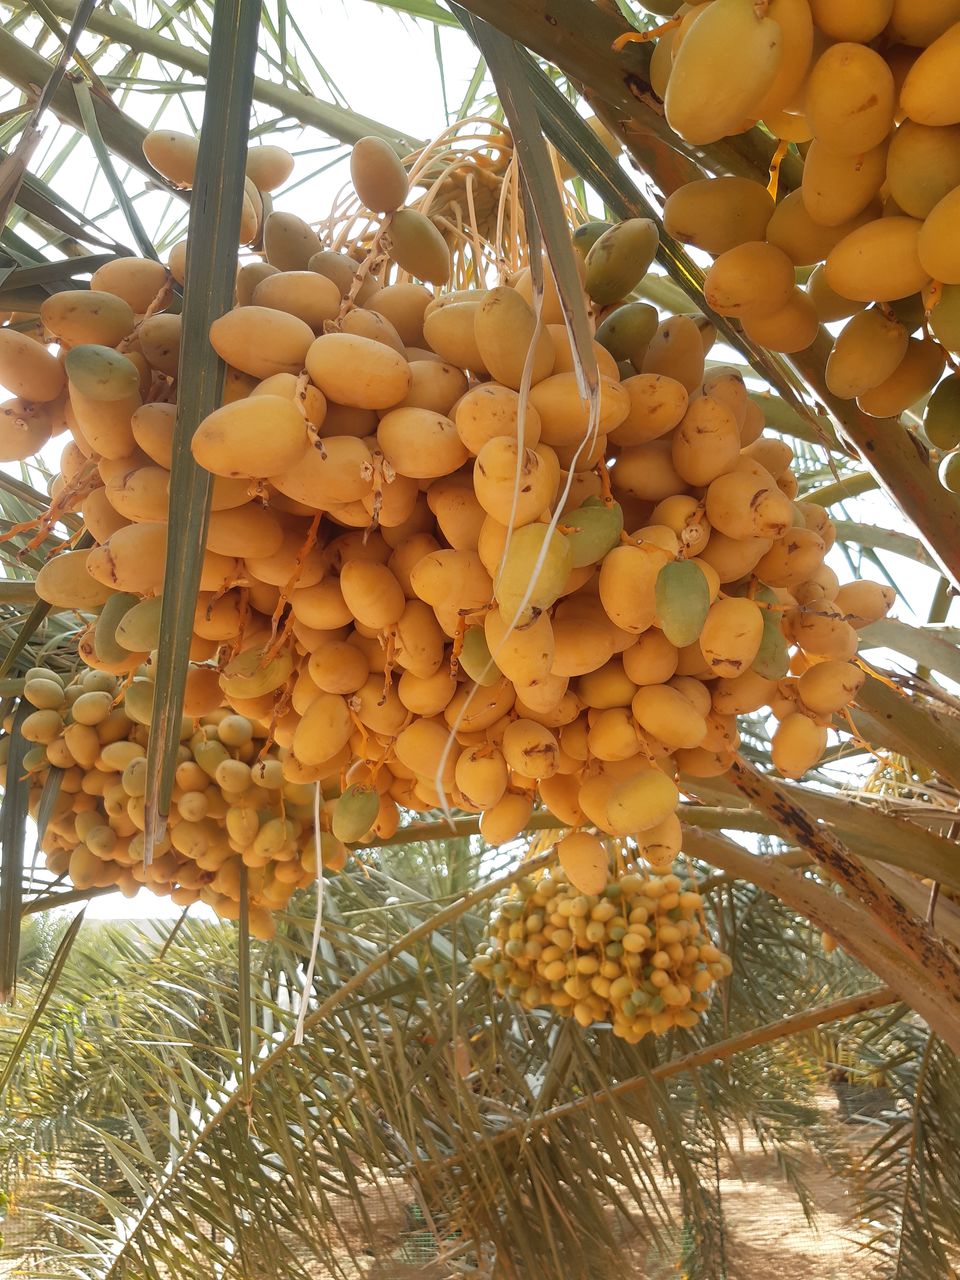 food, food and drink, healthy eating, fruit, low angle view, tree, plant, freshness, wellbeing, hanging, produce, no people, abundance, nature, palm tree, growth, date palm, day, tropical fruit, large group of objects, leaf, agriculture, ripe, tropical climate, outdoors, bunch, plant part, close-up